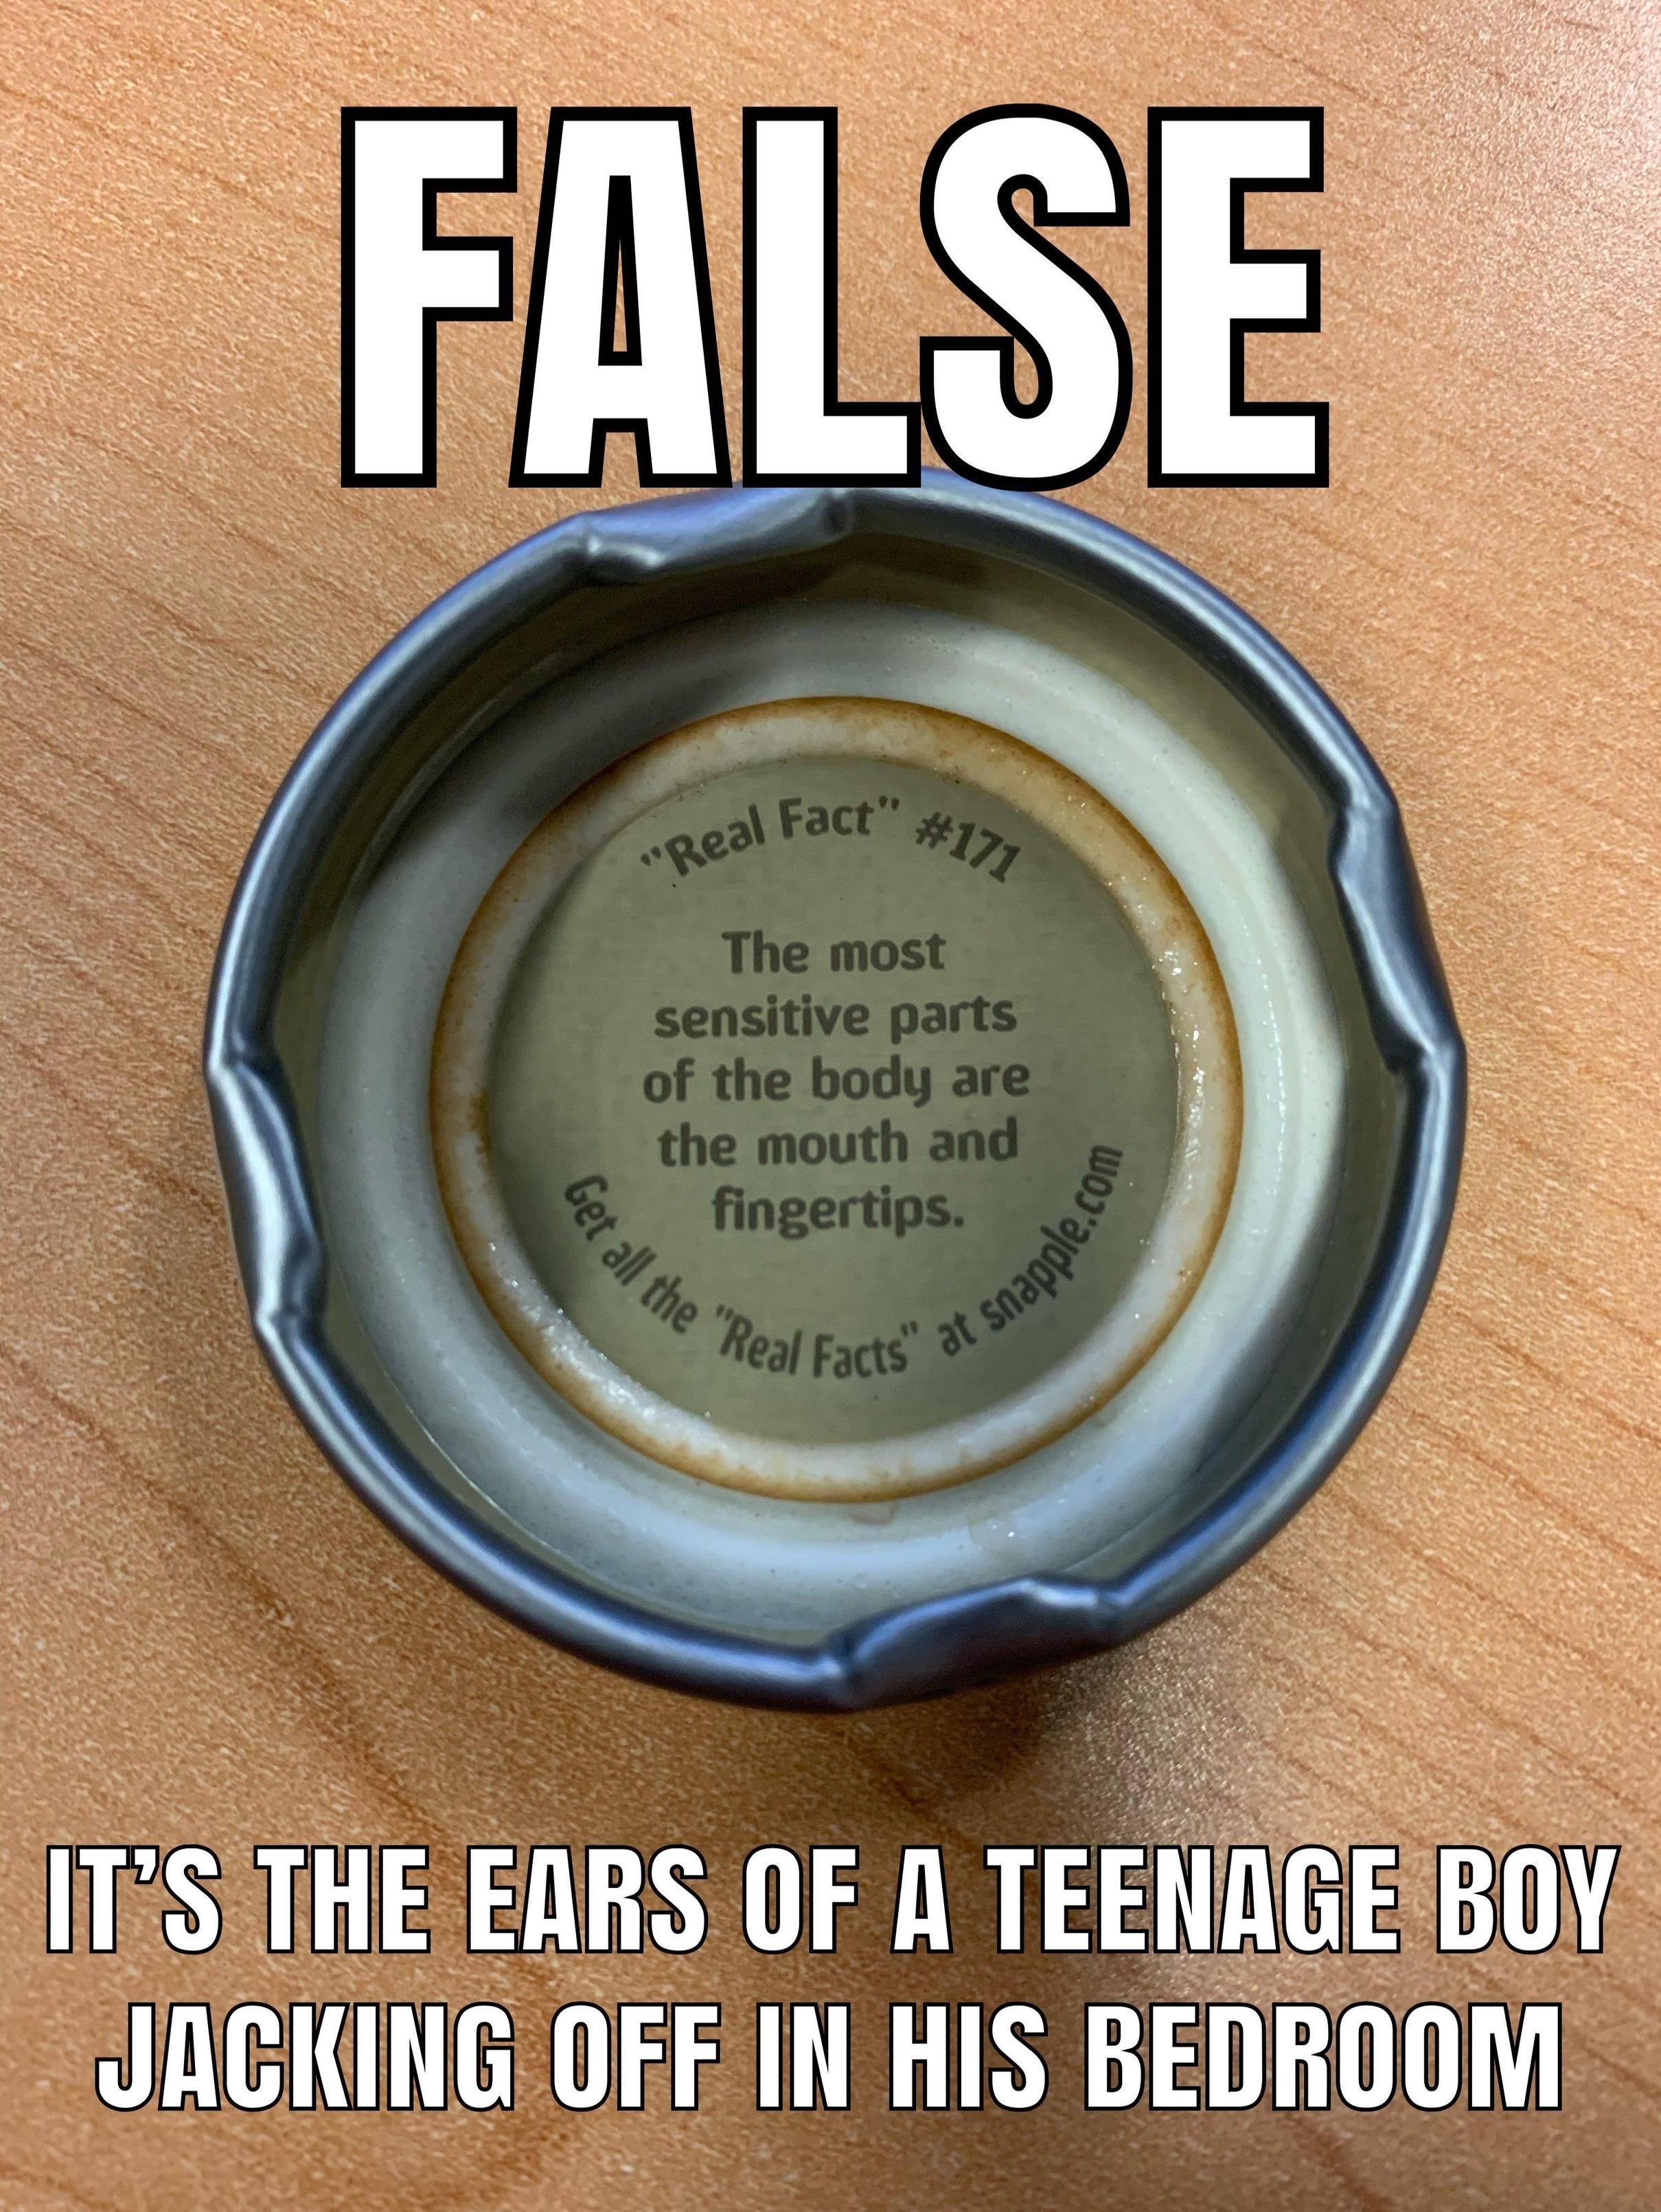 Snapple facts got it wrong